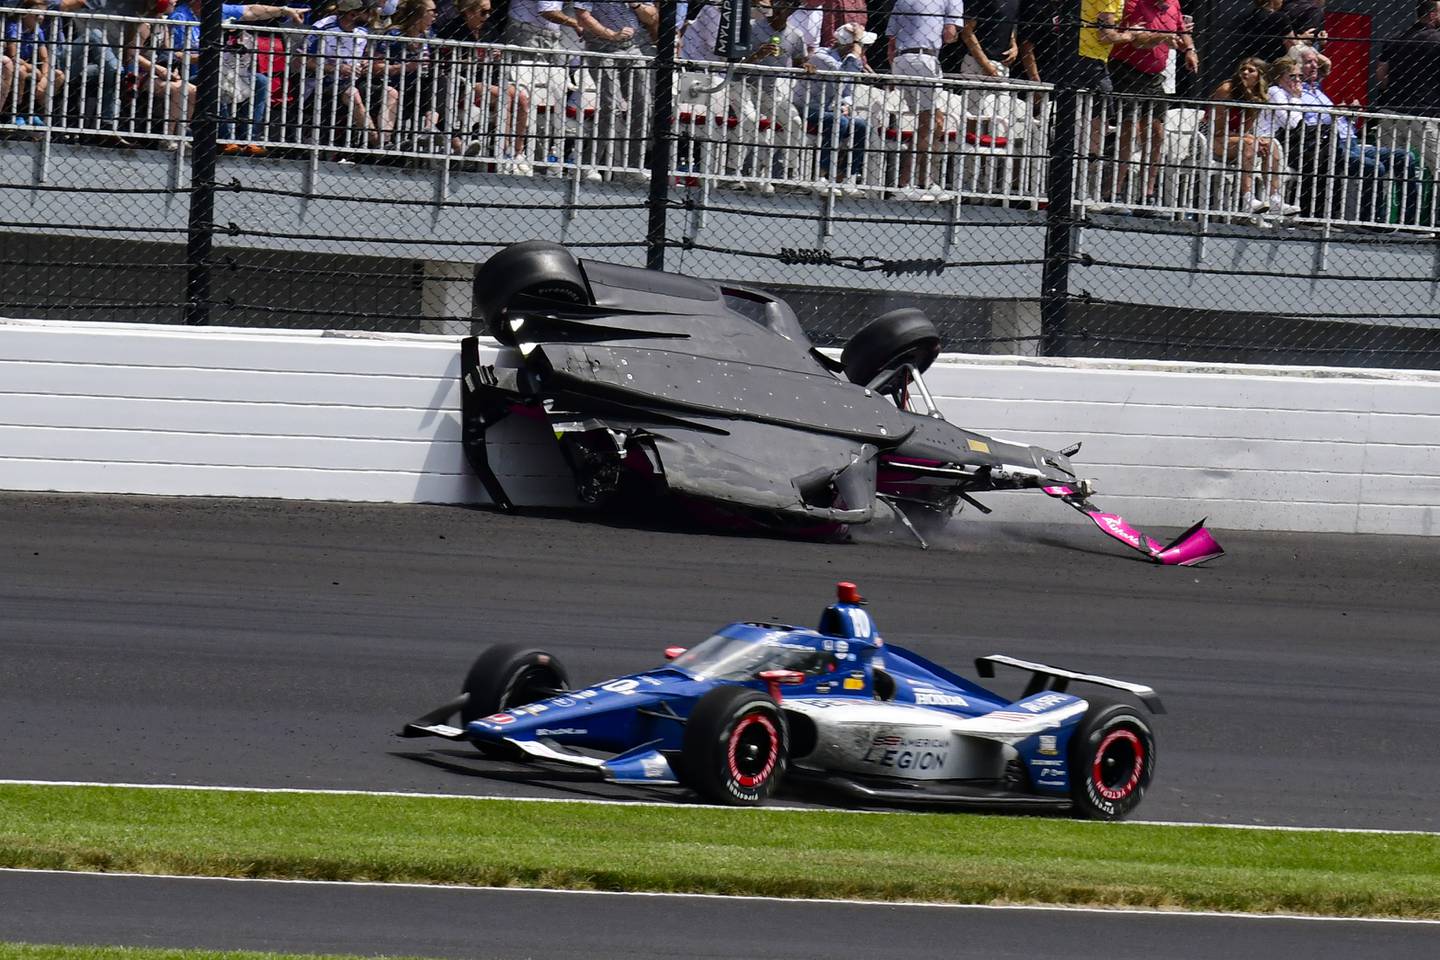 The car driven by Kyle Kirkwood, top, flips over after a crash in the second turn during the Indianapolis 500, Sunday, May 28, 2023, at Indianapolis Motor Speedway.